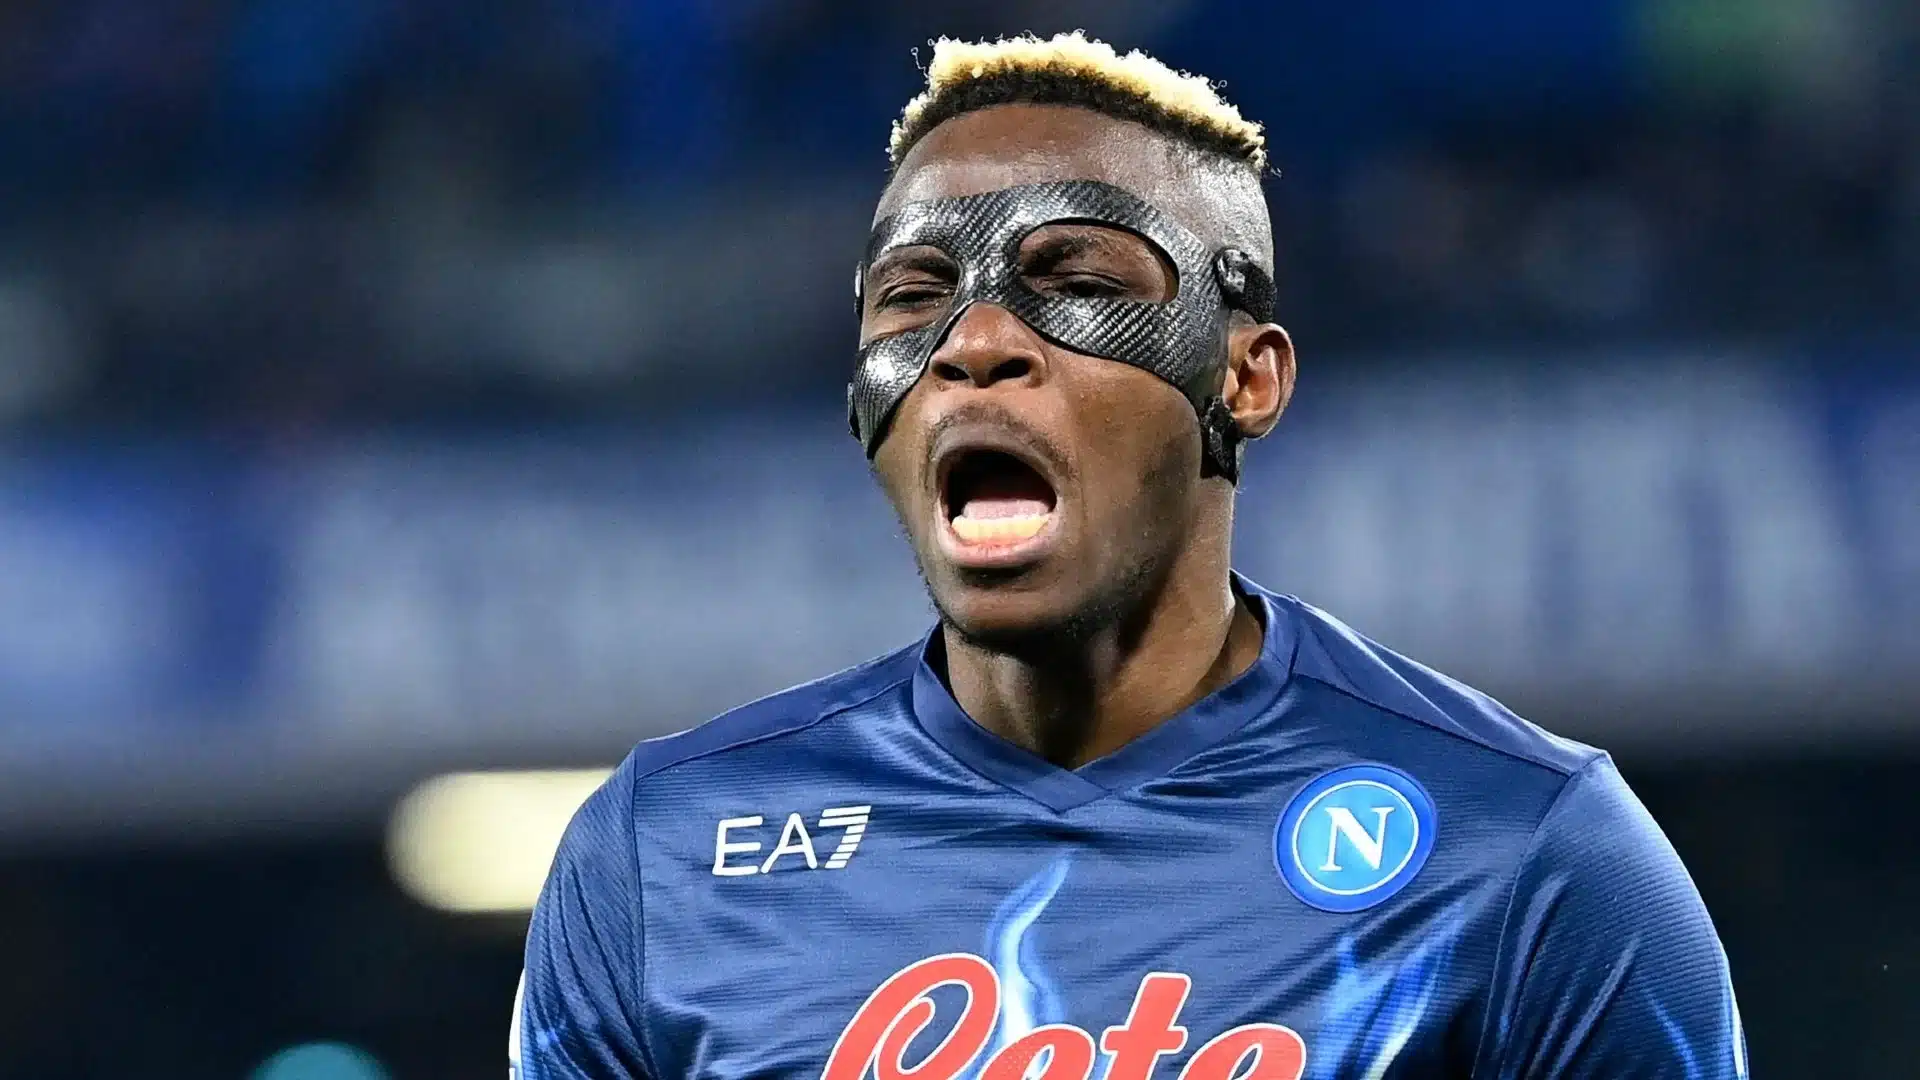 Osimhen sets new record at Napoli with his 100th career goal